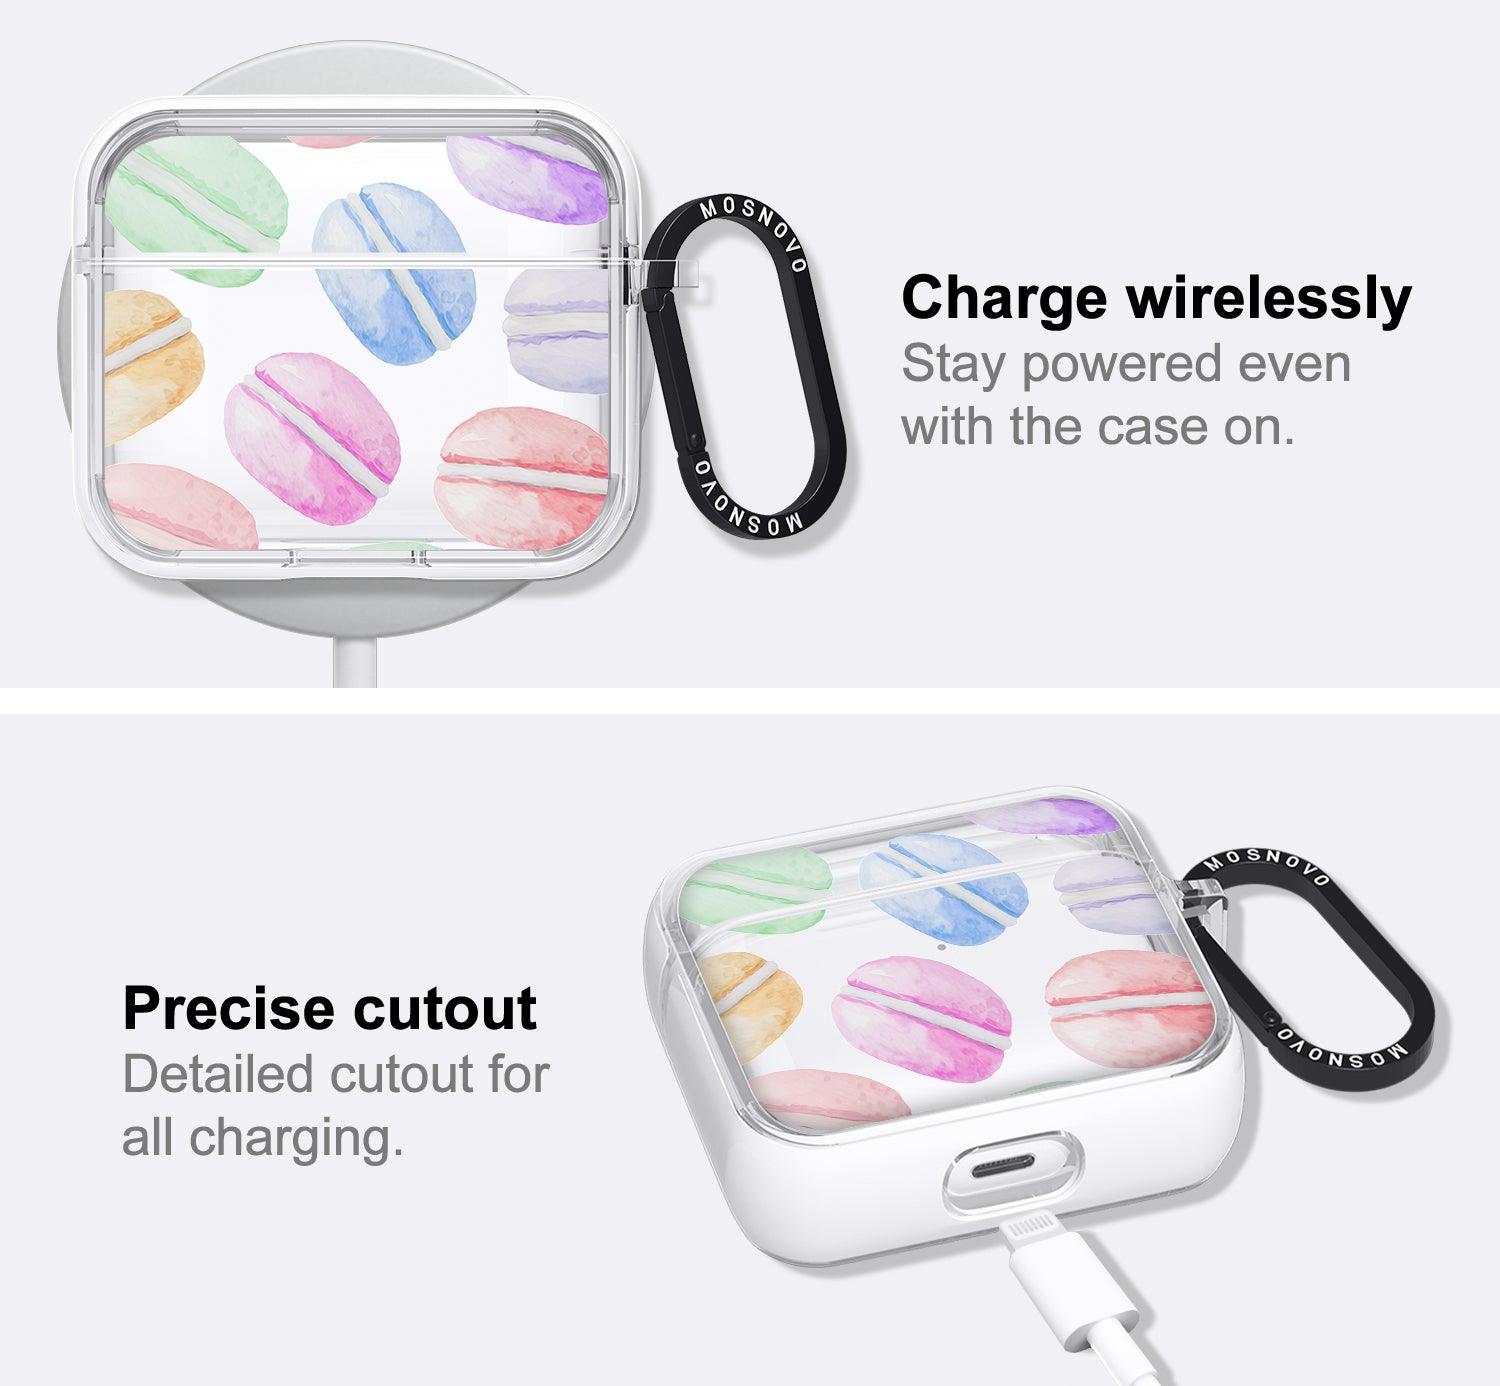 Macarons AirPods 3 Case (3rd Generation) - MOSNOVO